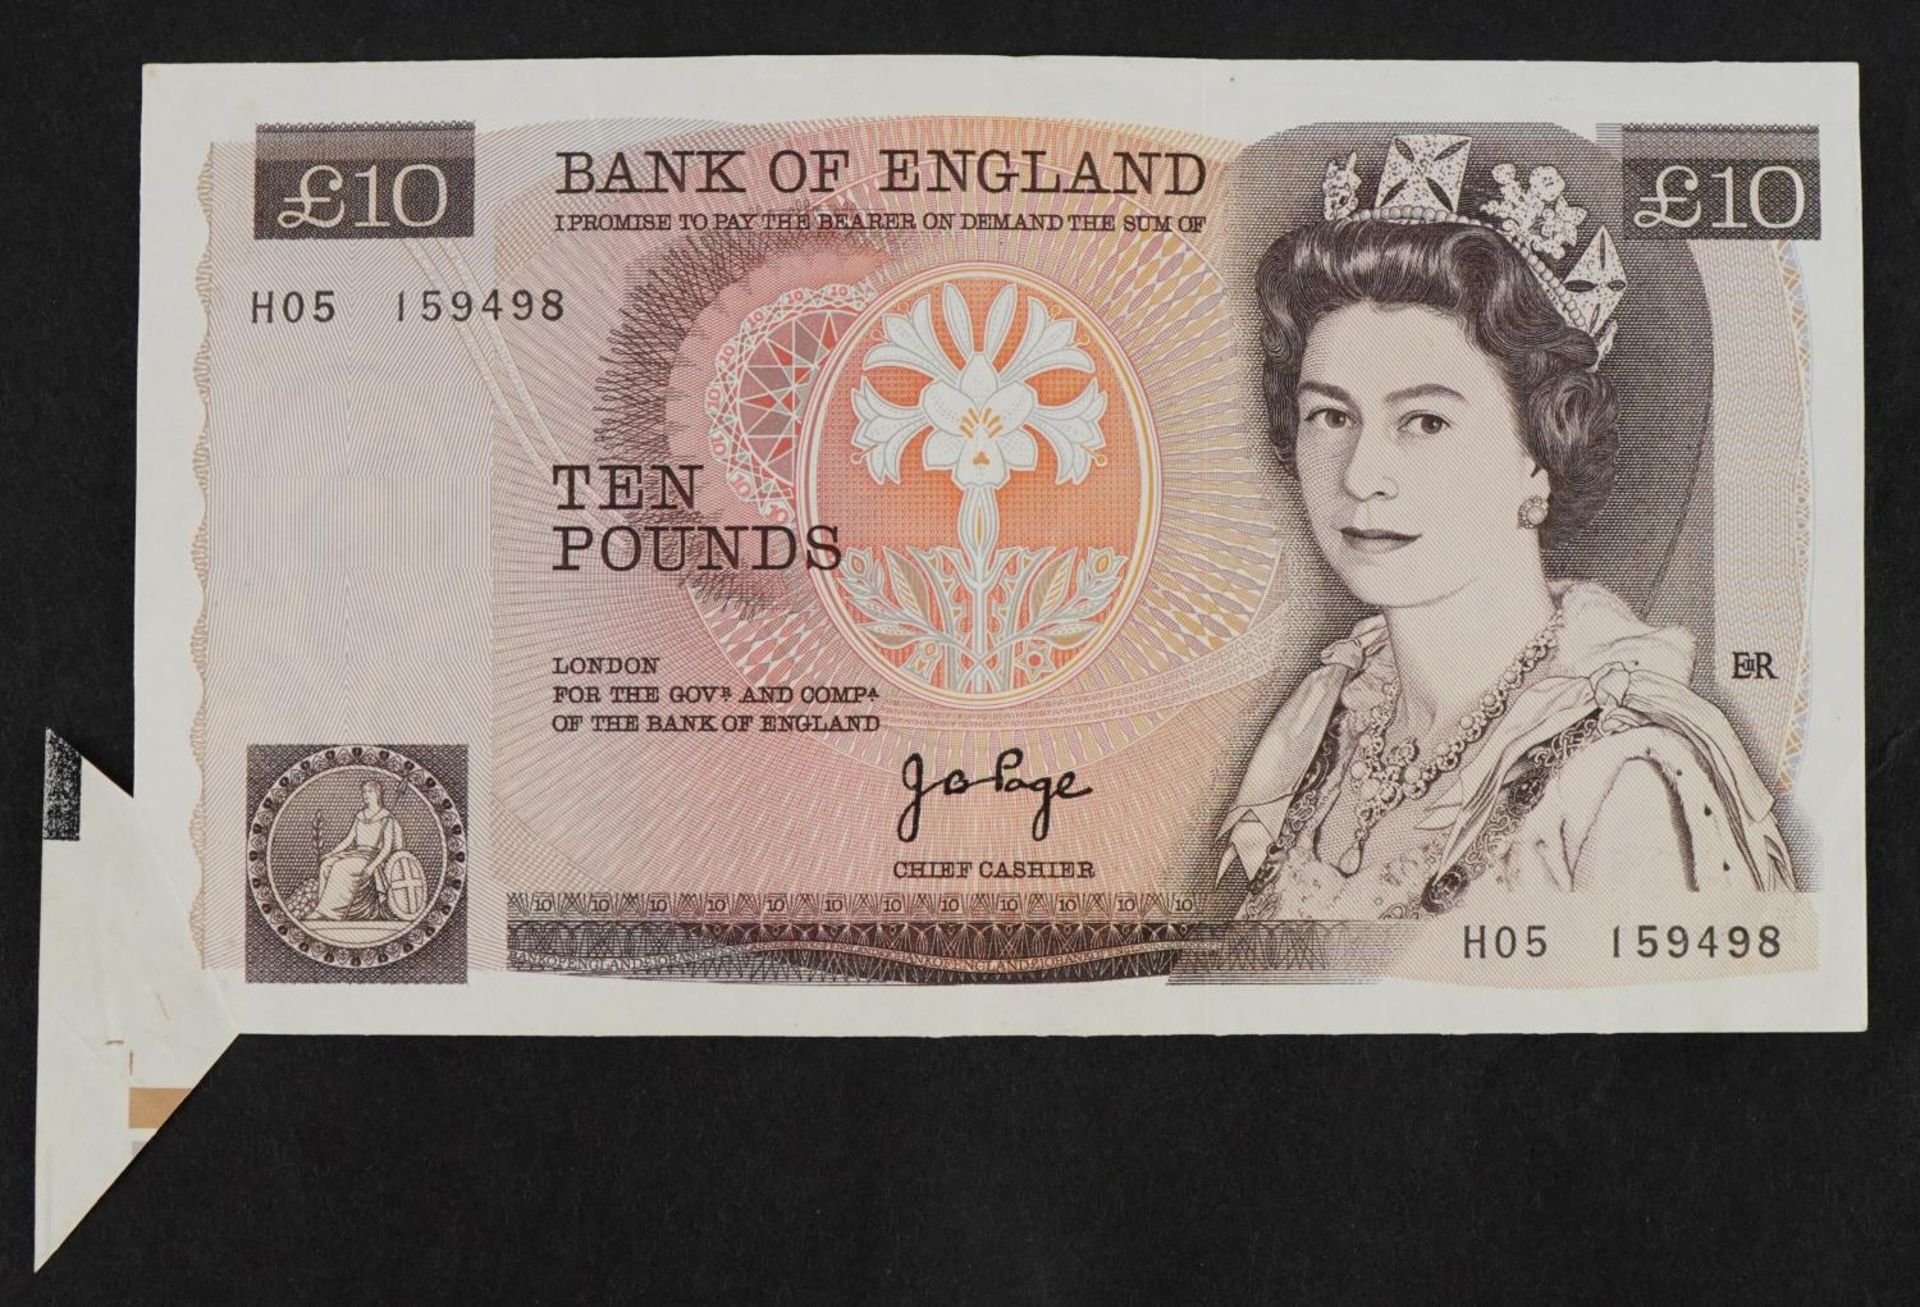 Bank of England Elizabeth II ten pound banknote with cutting error, J B Page Chief Cashier, serial